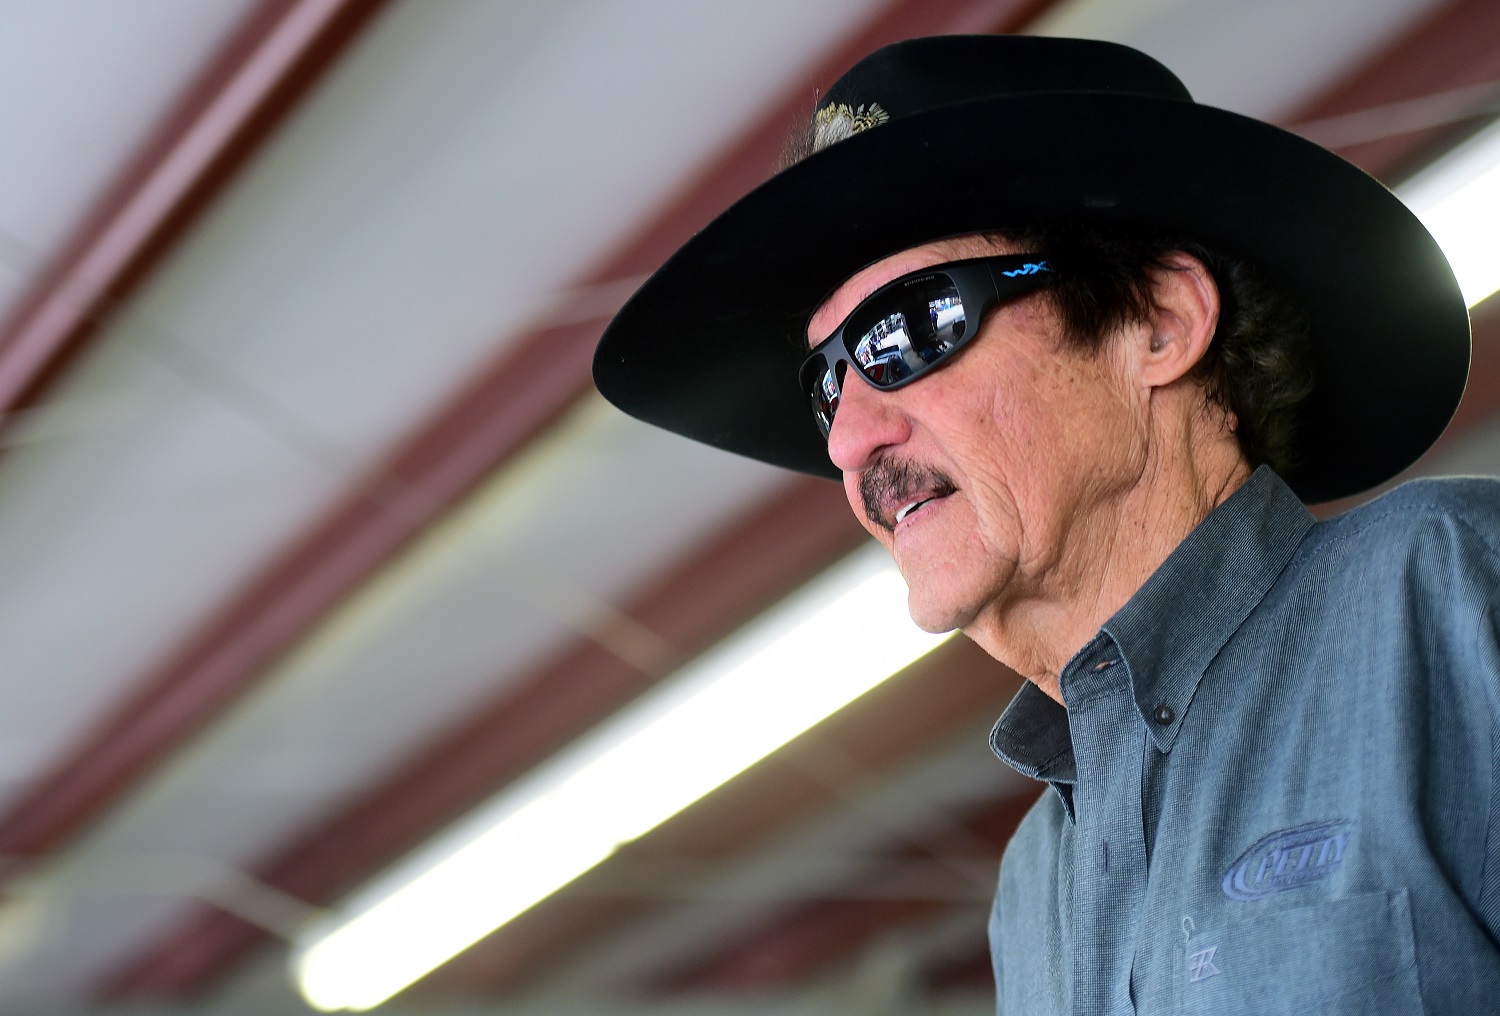 Richard Petty’s Stunning Decision About RPM’s Future Is a Positive NASCAR Development